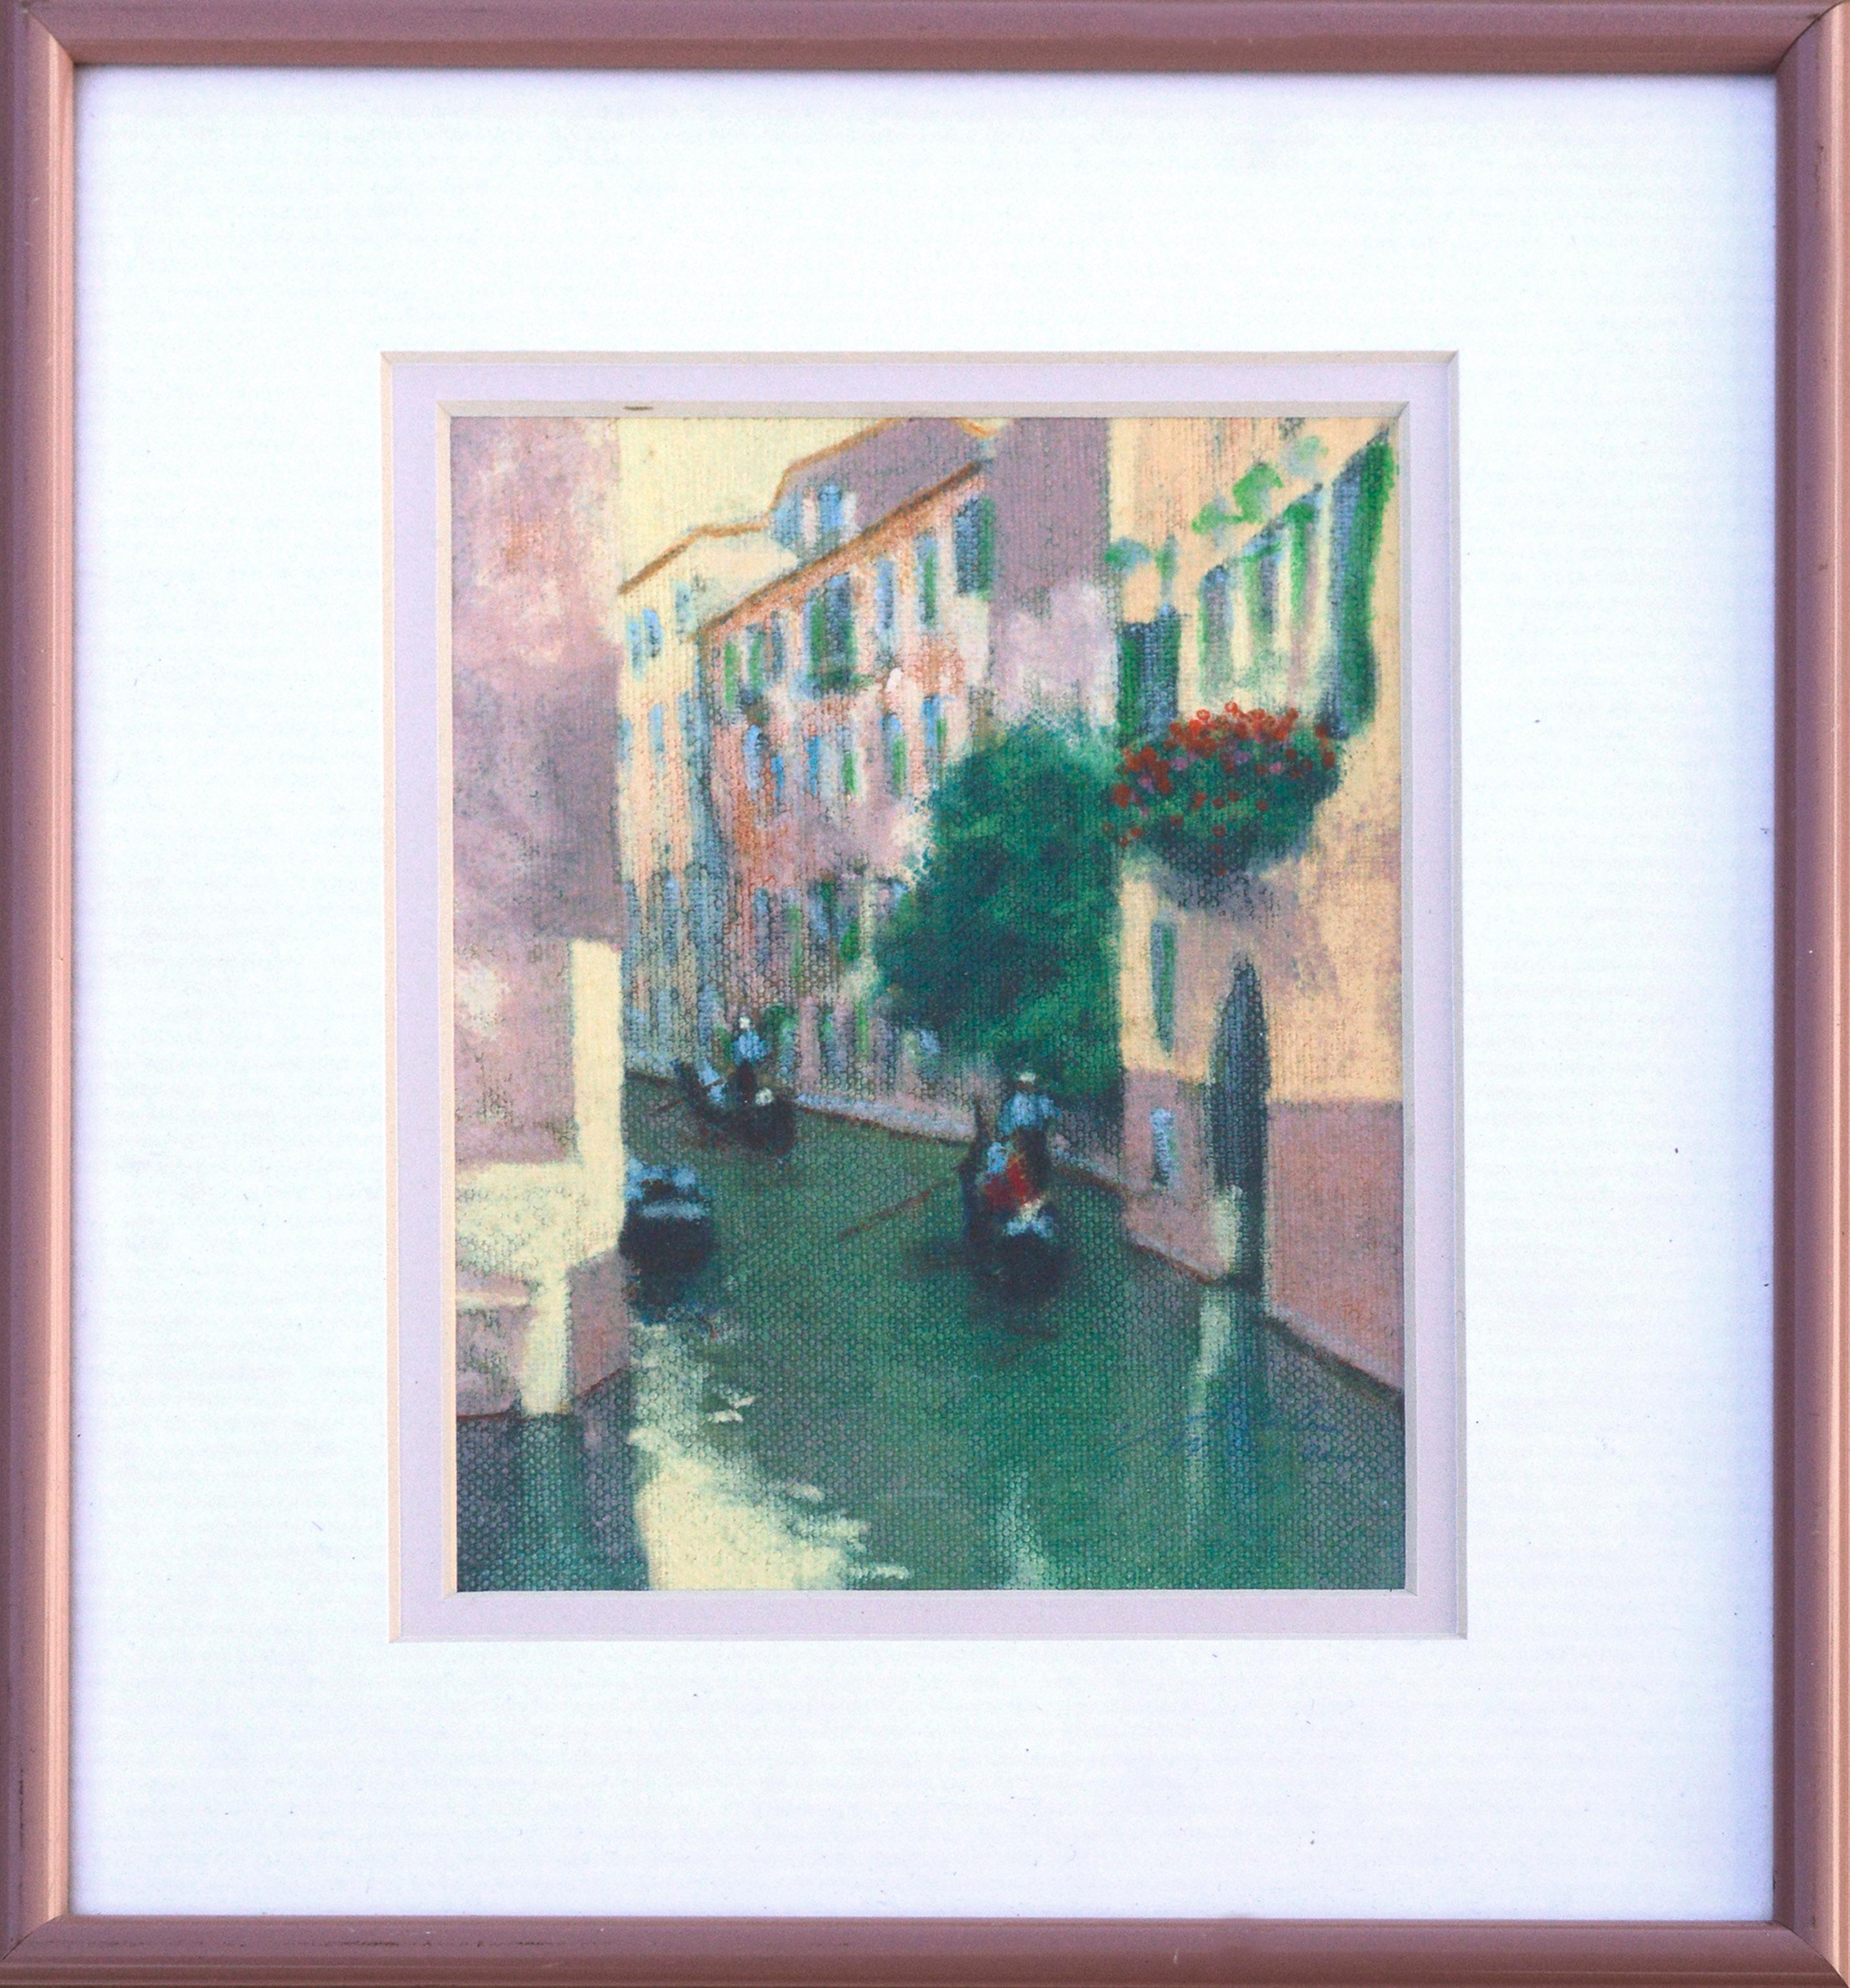 Canal with Gondolas - Venice, Italy Figurative Landscape  - Painting by Unknown